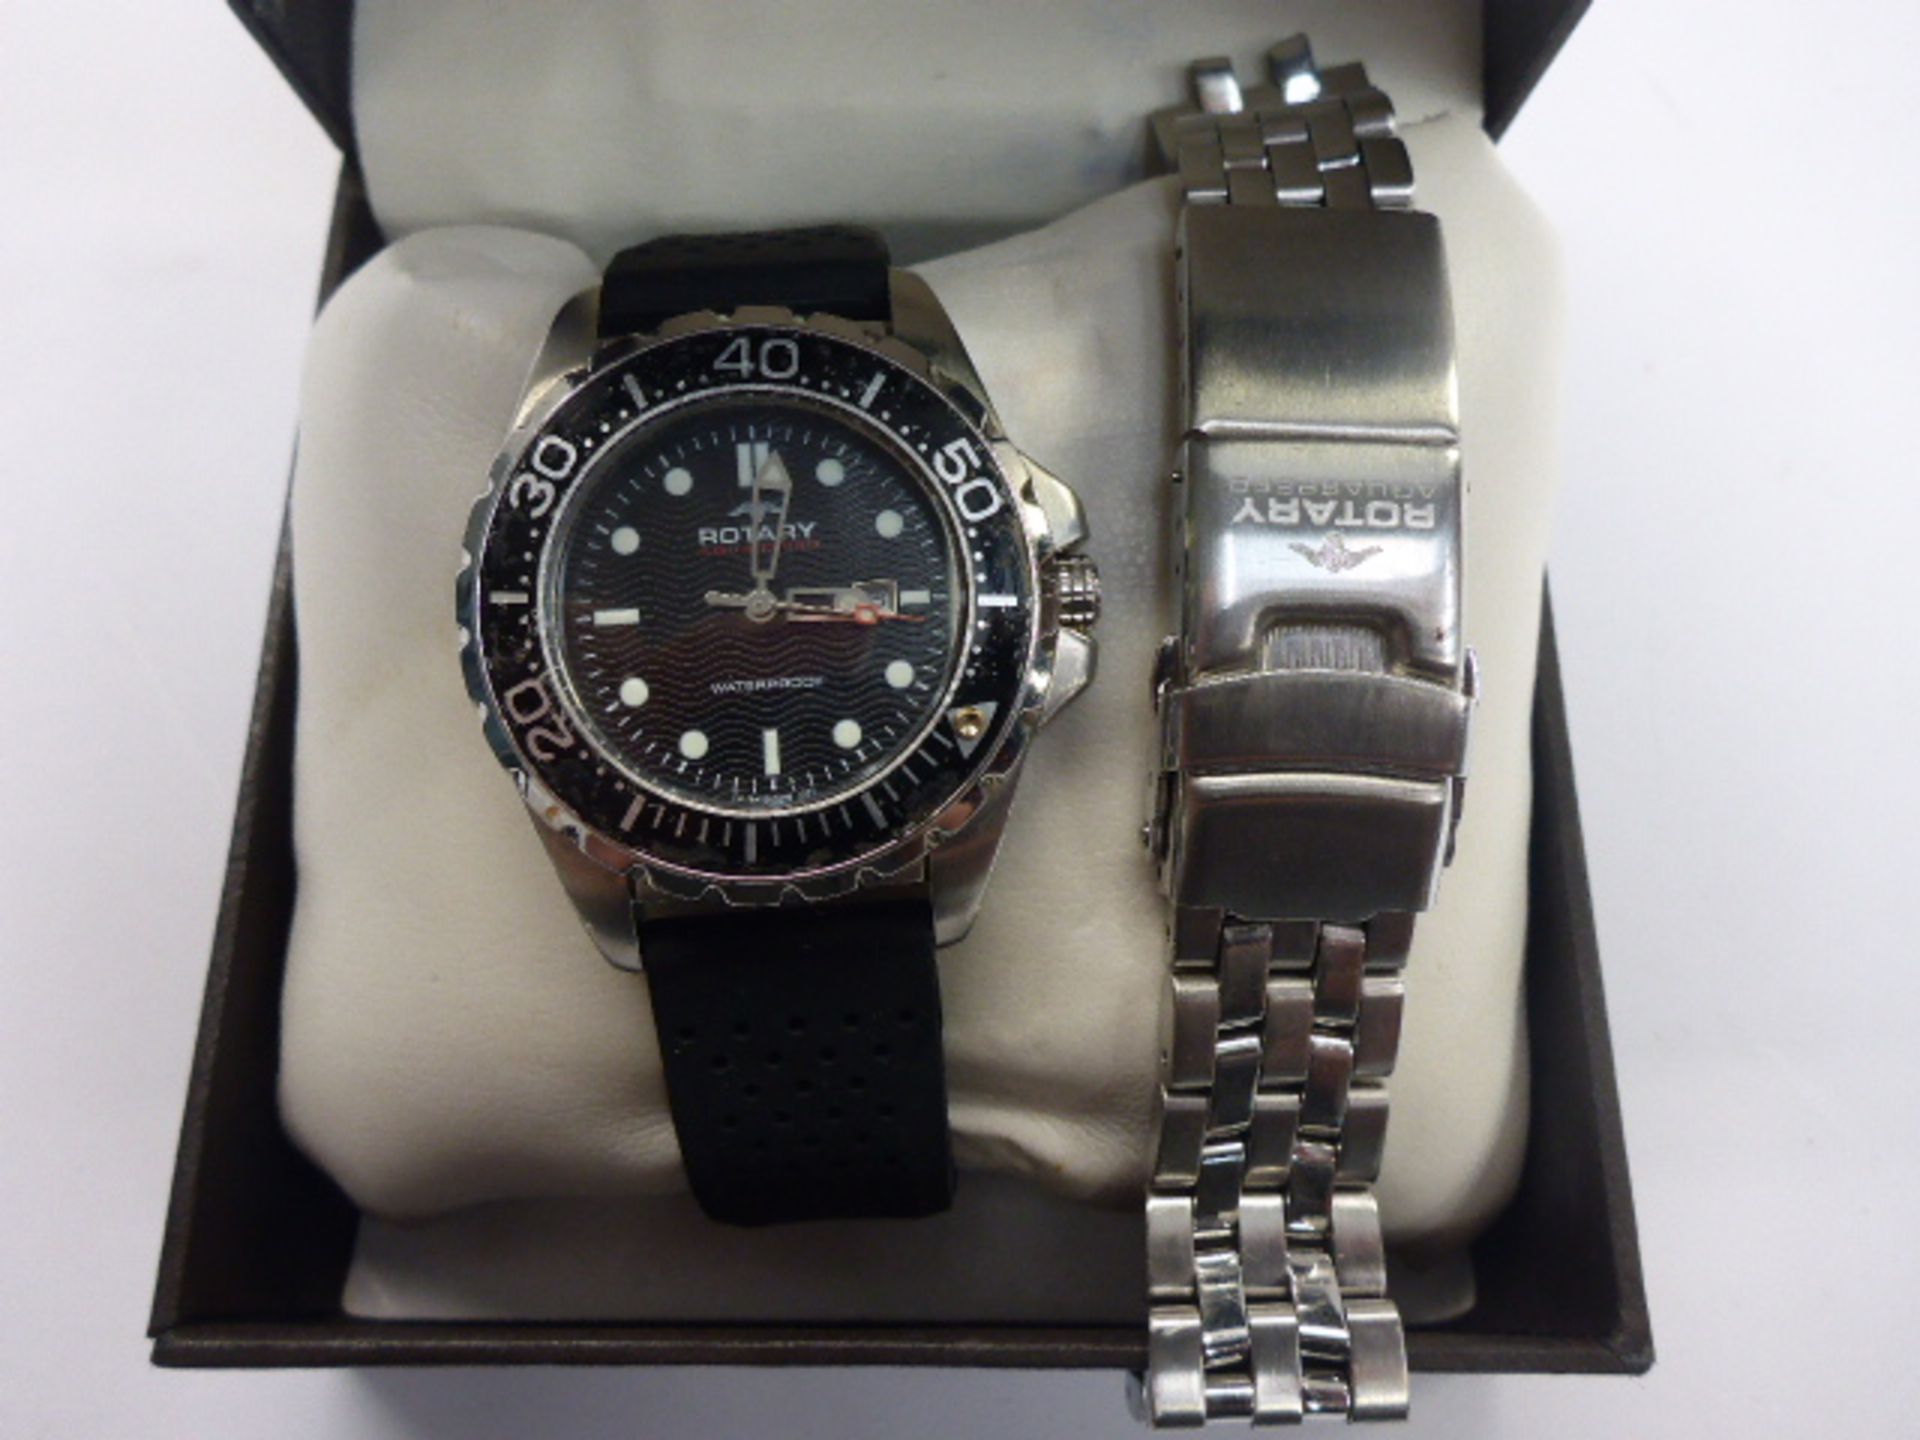 Rotary Aquaspeed wristwatch with additional stainless steel strap in box